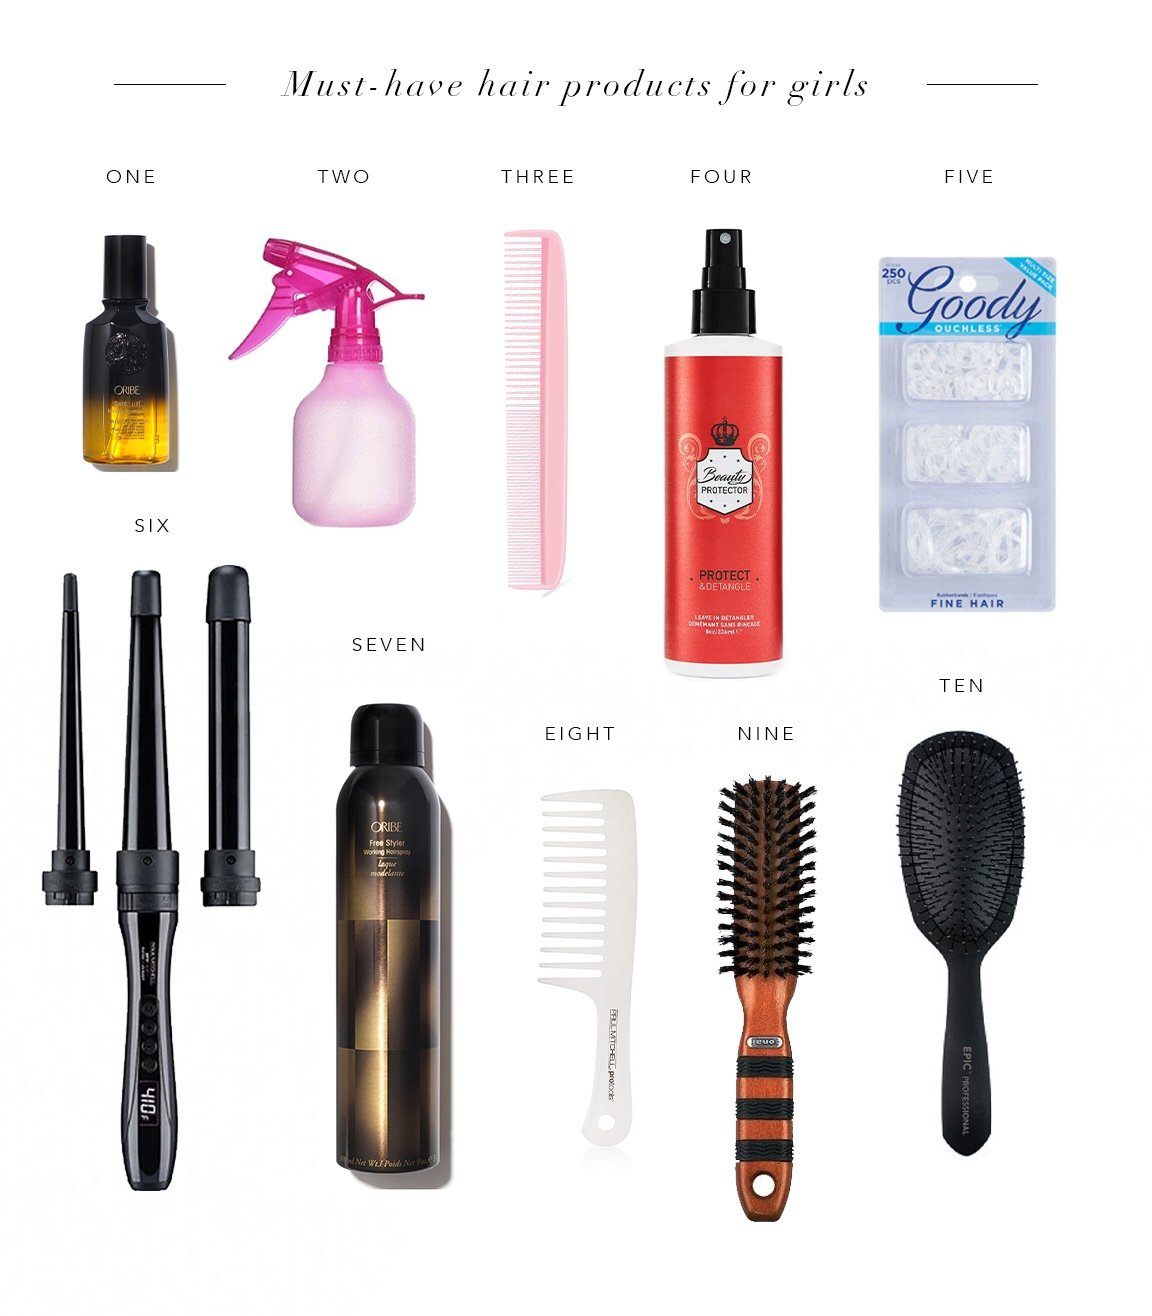 Must-have hair products for girls...